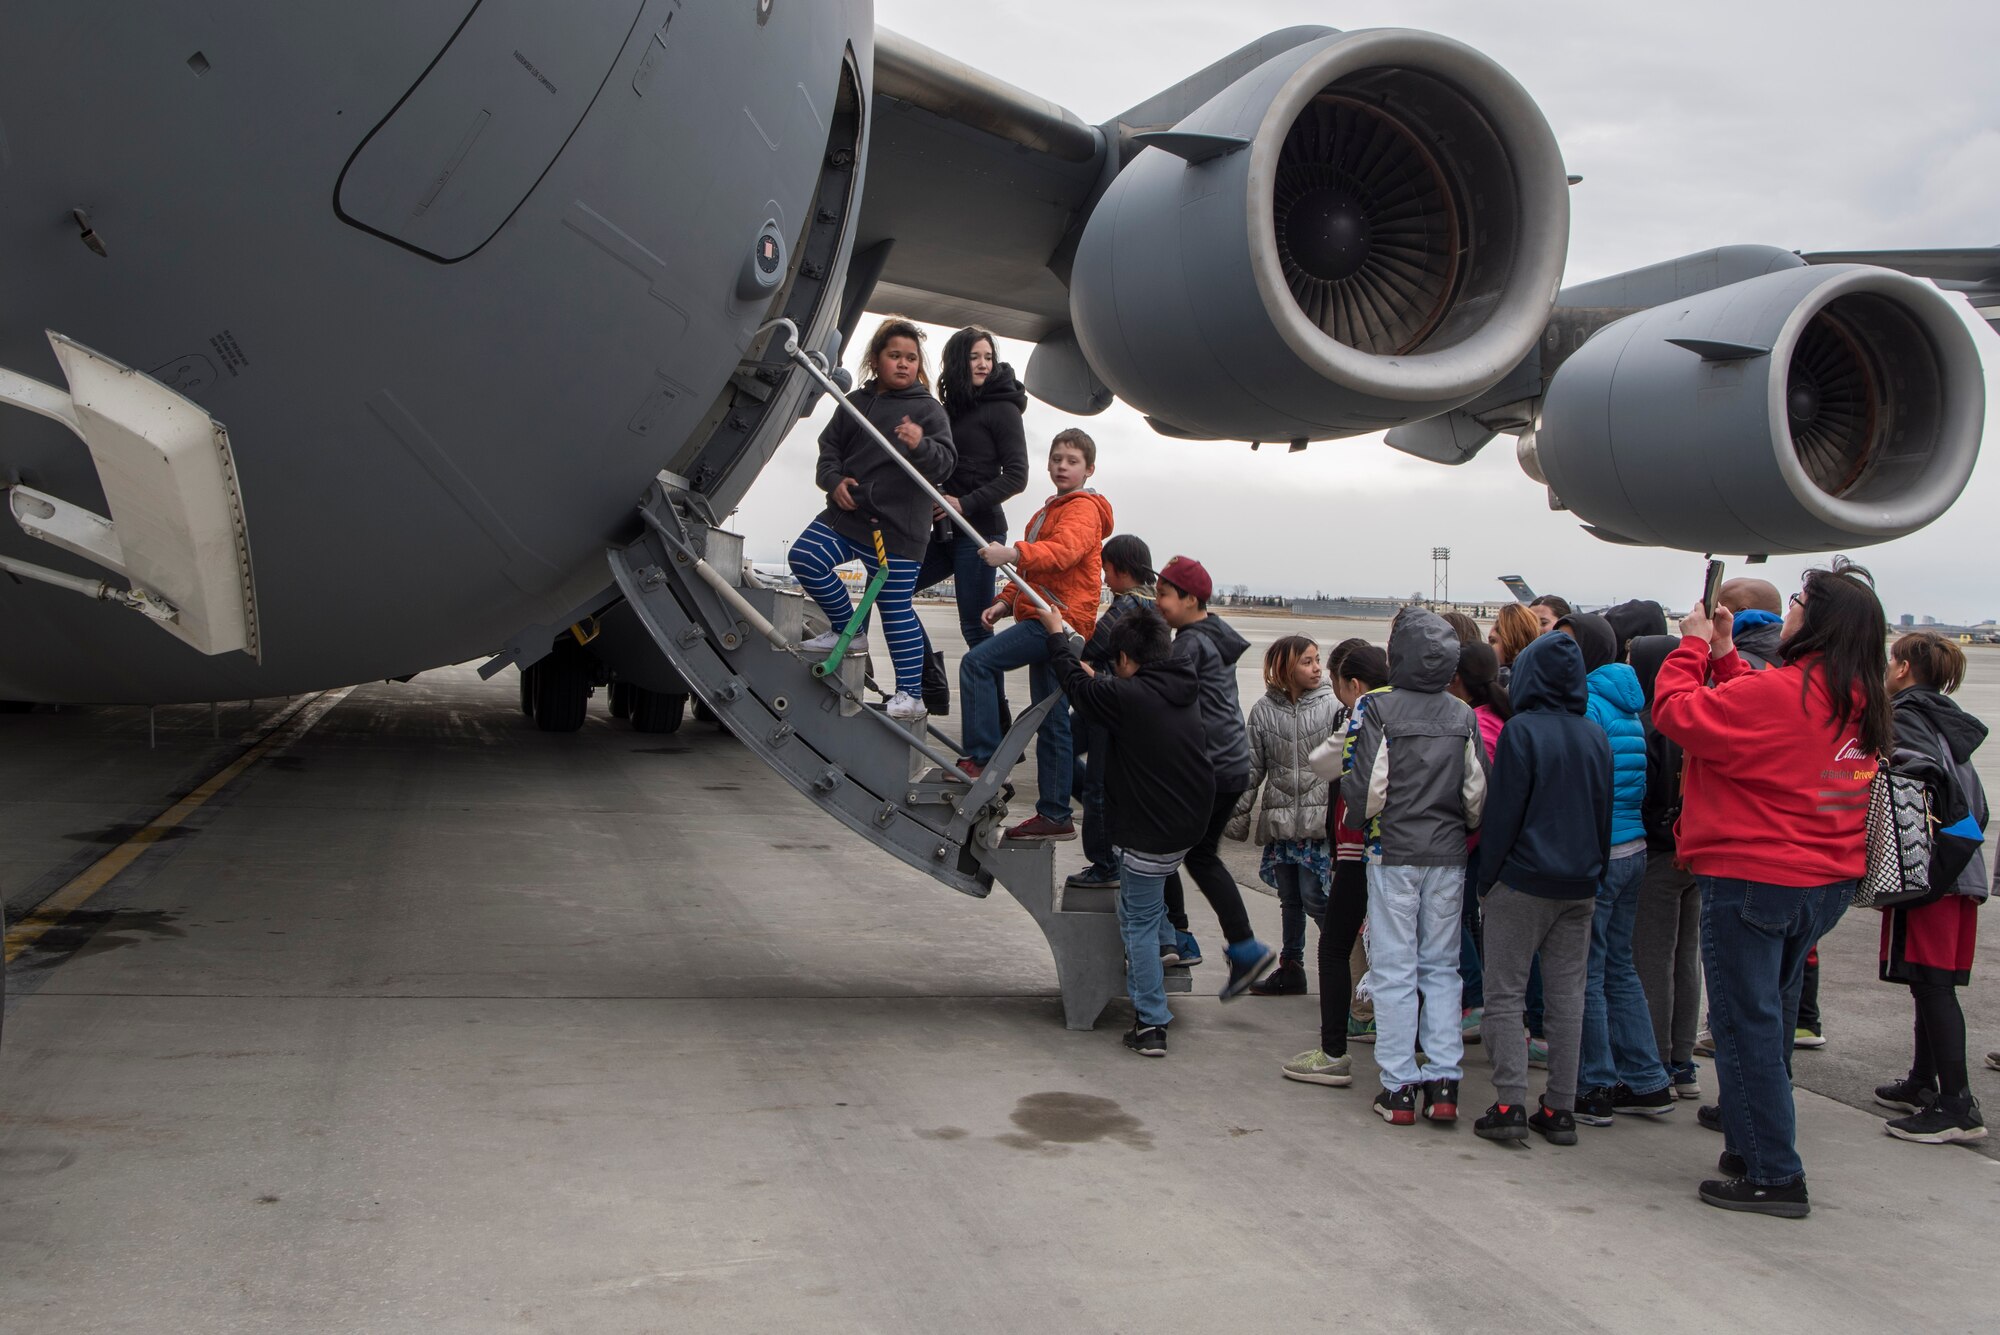 Students in 5th-grade from Wonder Park and Mountain View elementary schools and chaperones enter a C-17 Globemaster III static display at the “Day in the Life of Airmen” tour on Joint Base Elmendorf-Richardson, Alaska, May 4, 2018. Subject-matter experts led the students through displays of a C-17, F-22 Raptor, Aerospace Ground Equipment, and more. The tour included a pilot, loadmaster, crew chief and several other SMEs to speak about the displays.